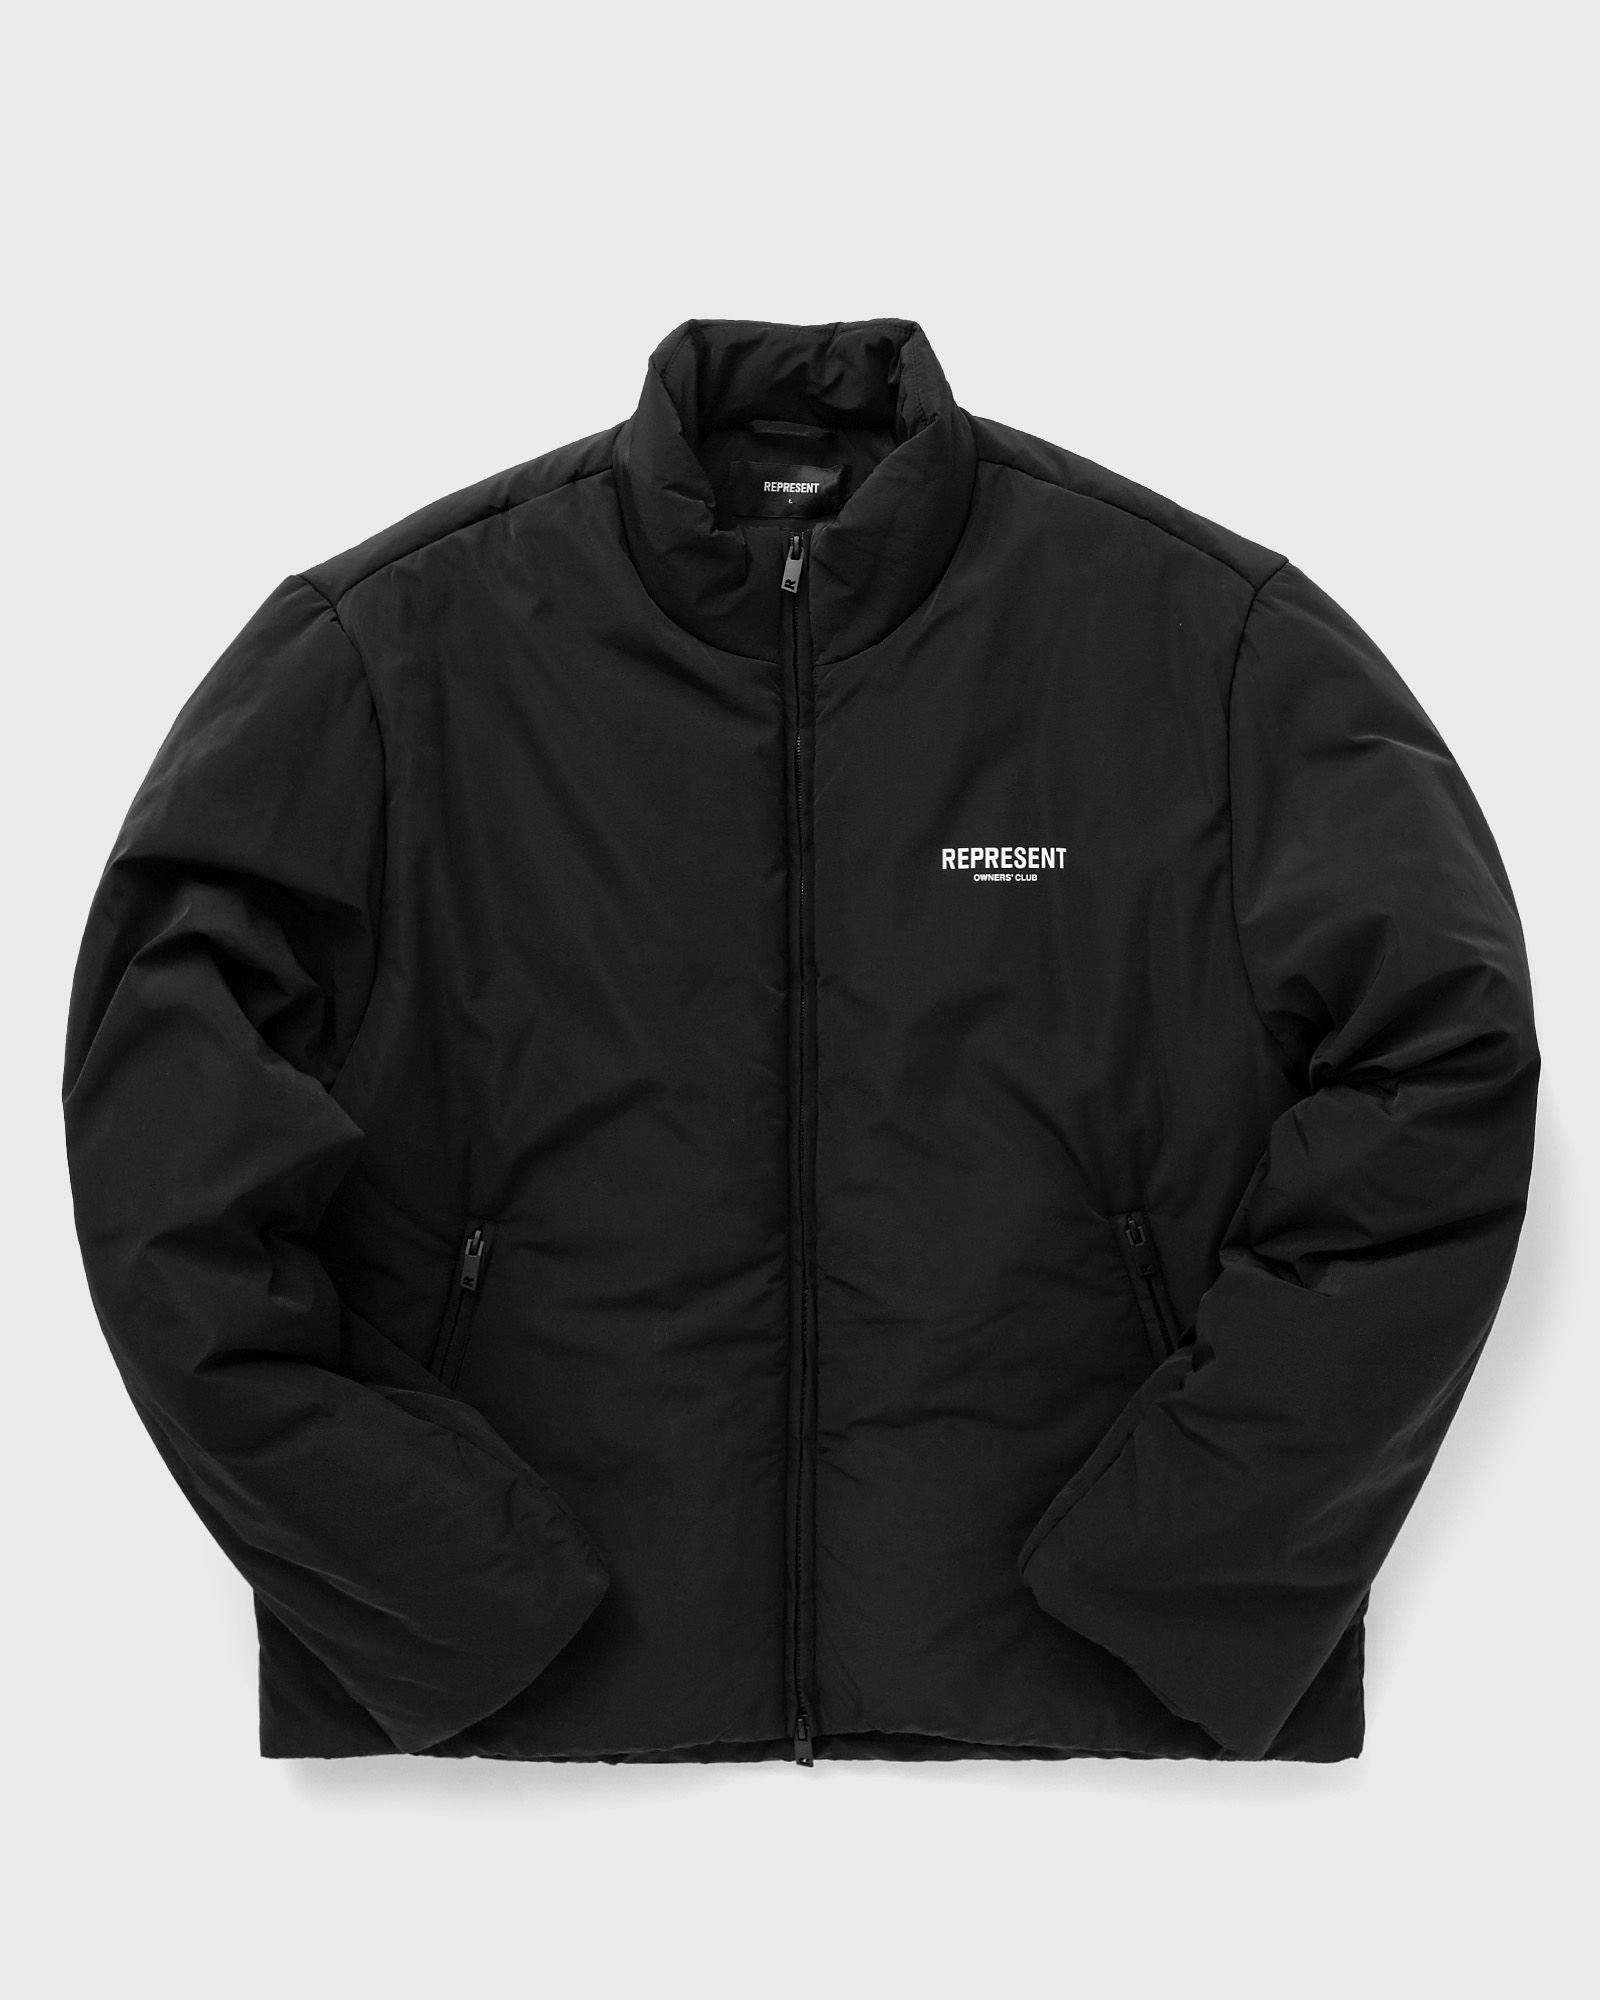 REPRESENT OWNERS CLUB WADDED JACKET